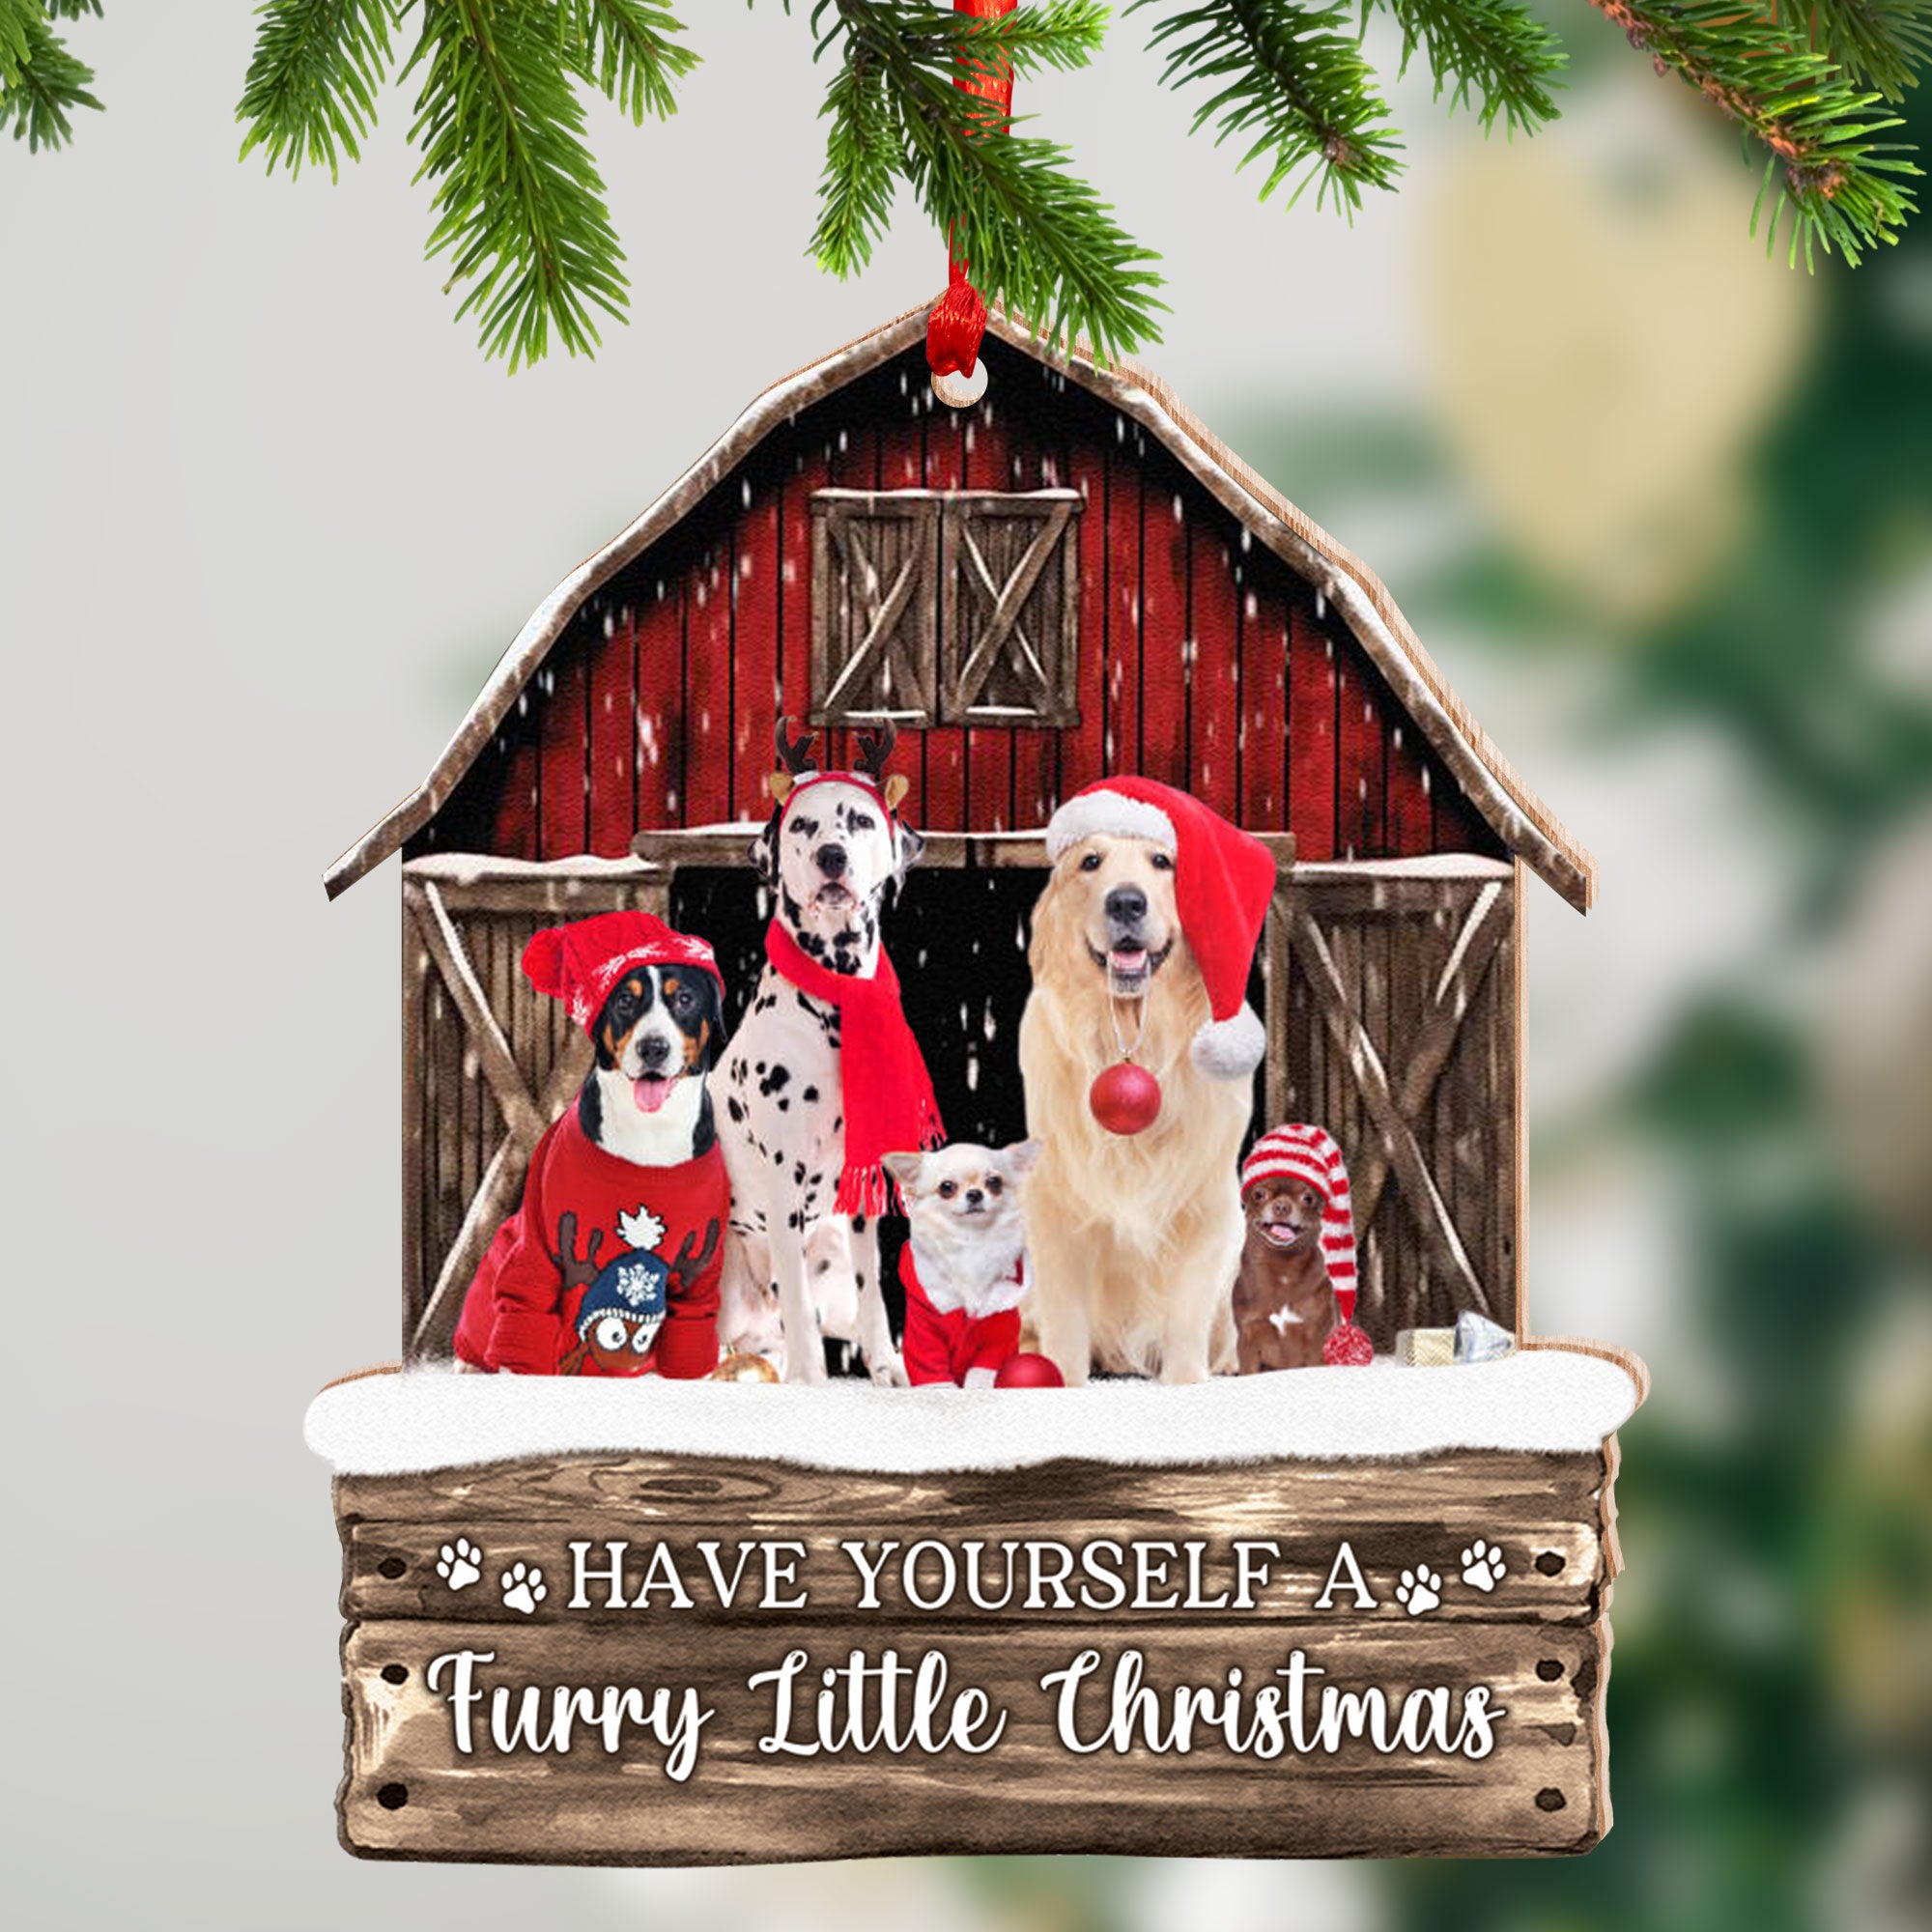 Pet House Christmas, Custom Photo And Quote - Personalized Custom Shaped Wooden Ornament - Gift For Pet Lover, Christmas Gift